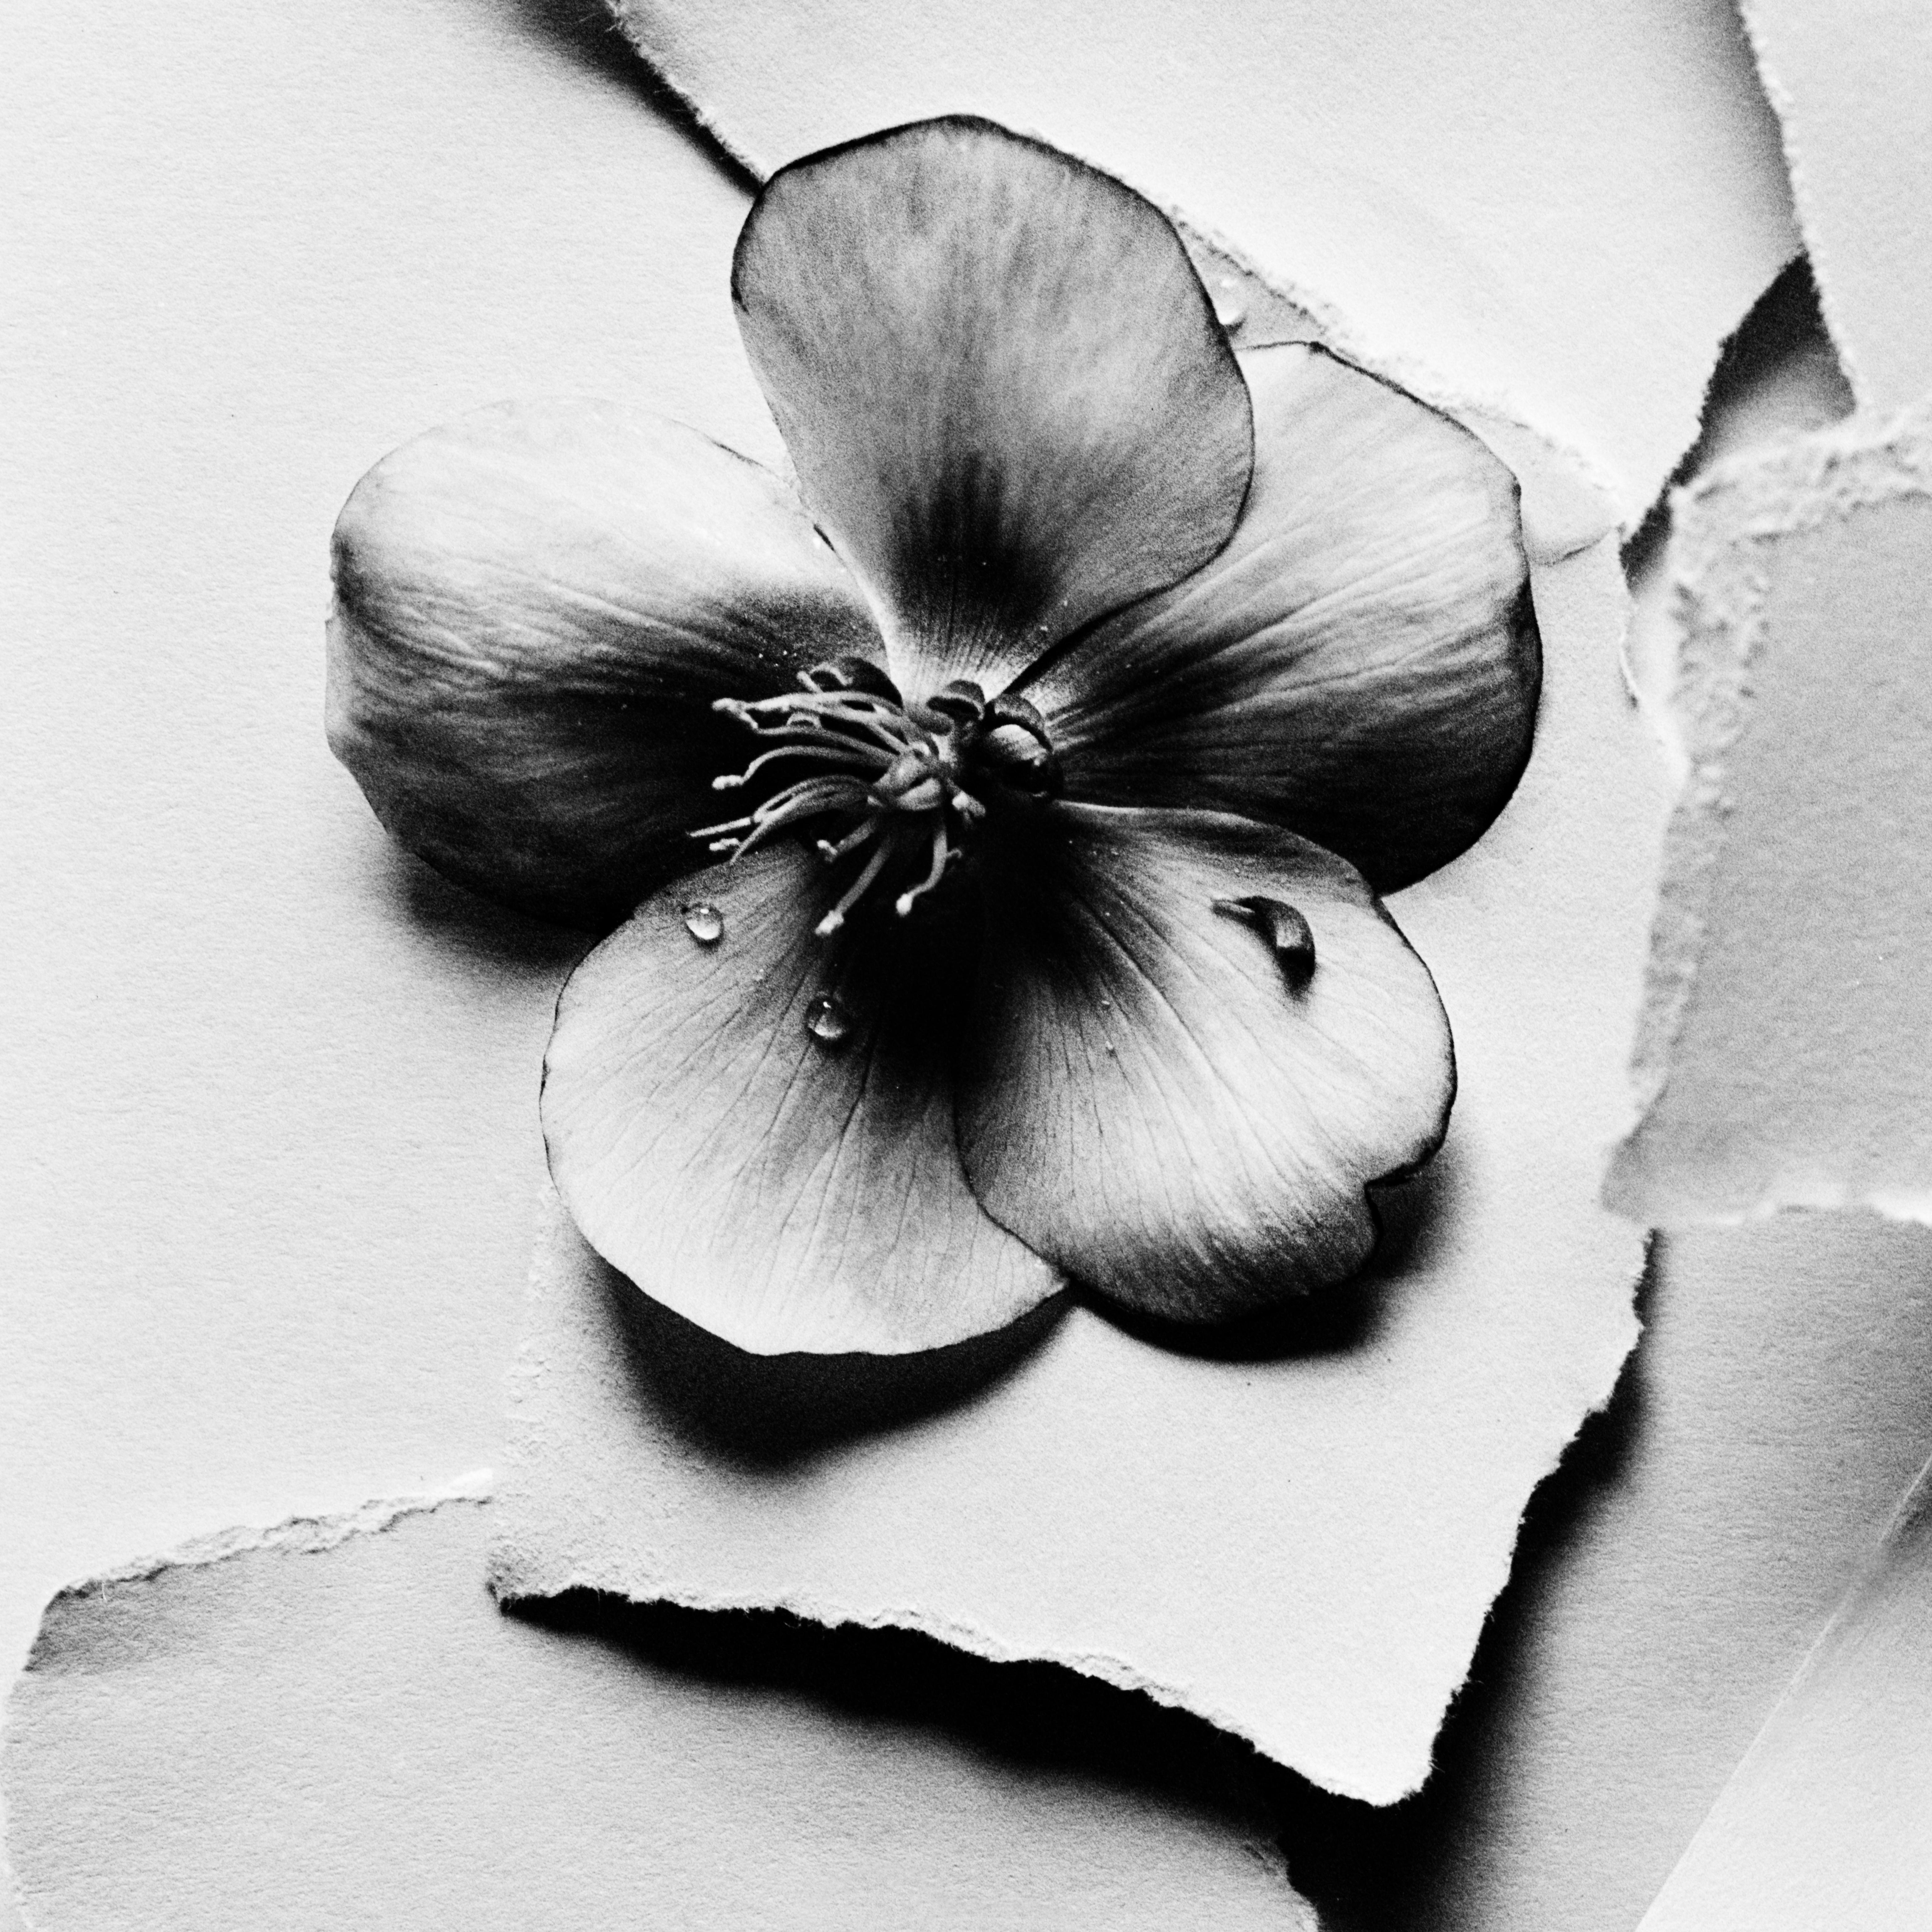 Black Hellebore - analogue black and white floral photography - Photograph by Ugne Pouwell